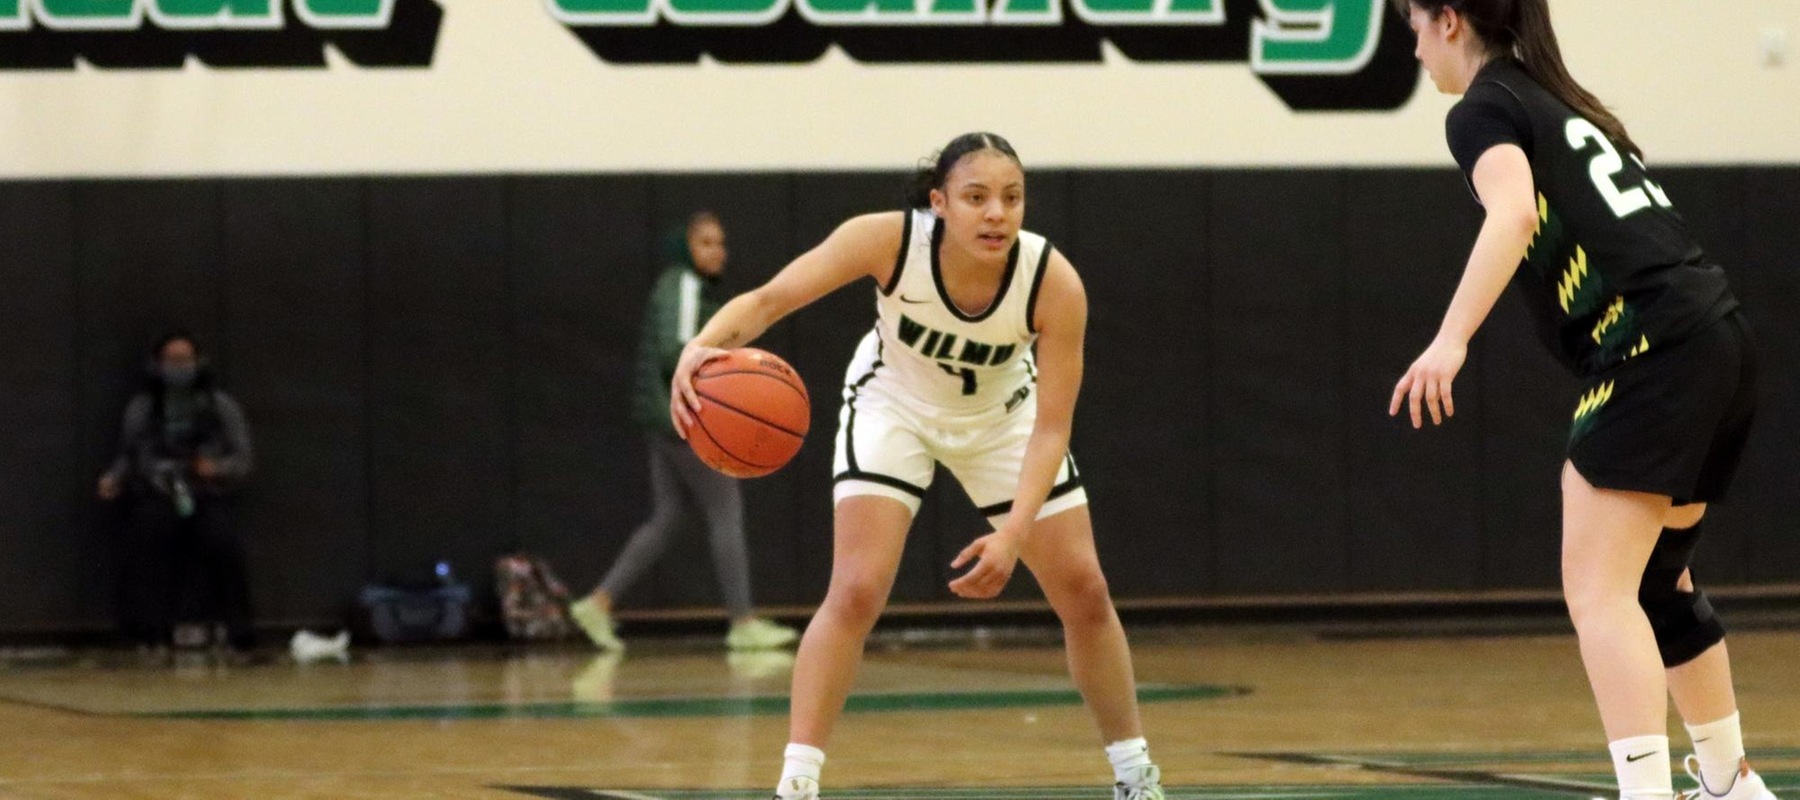 UDC Separates From WilmU Women’s Basketball in Fourth Quarter To Wrap Up Opening Weekend